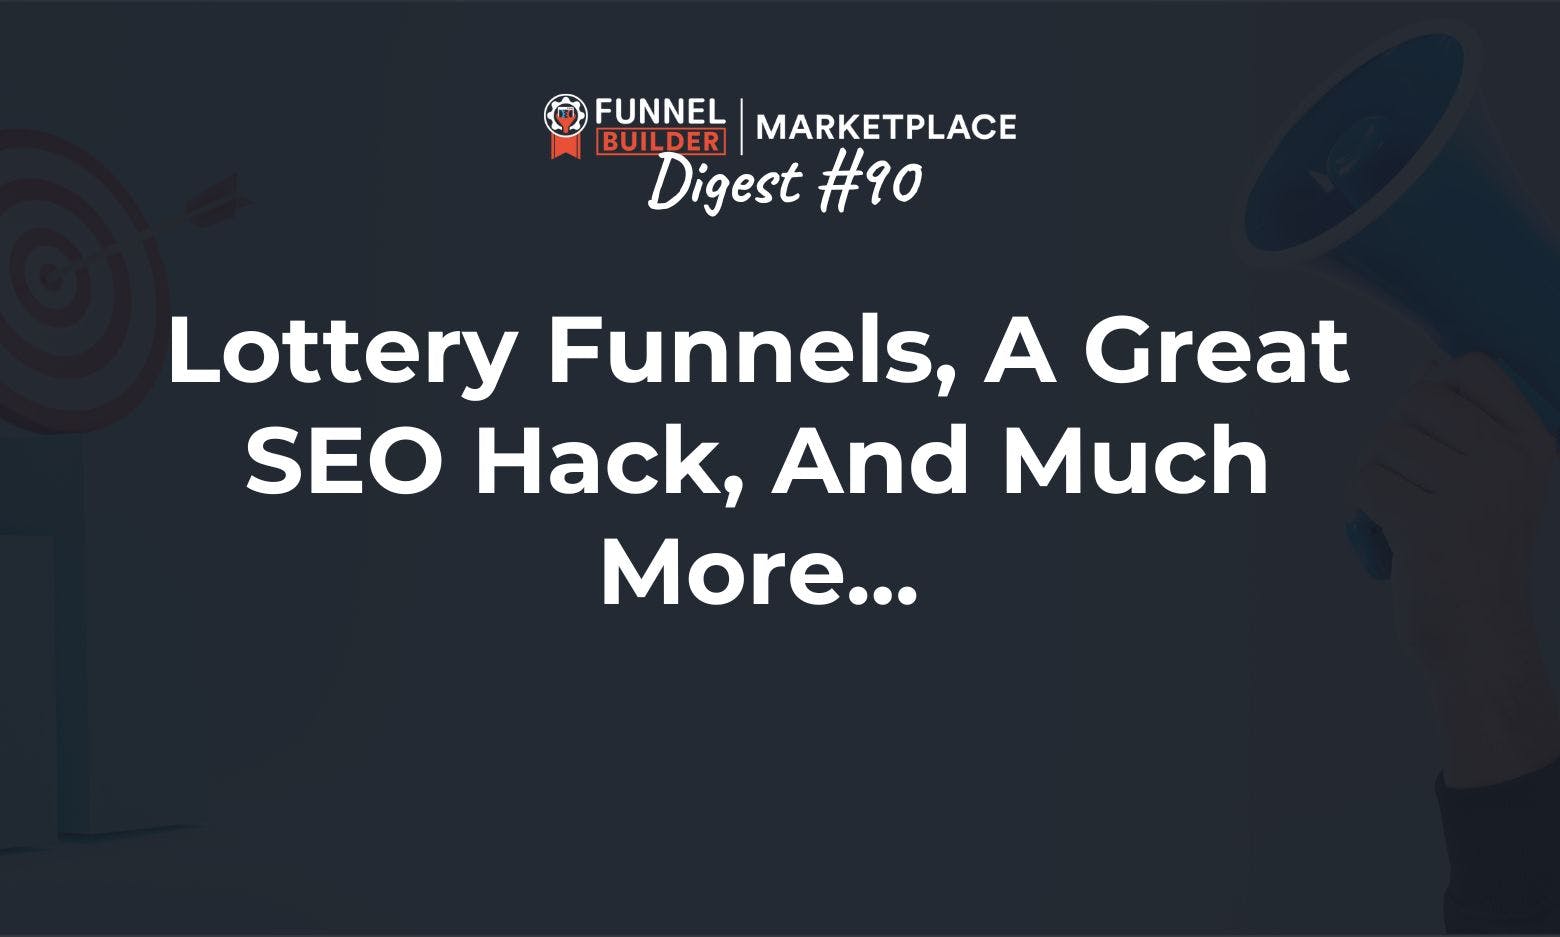 FBM Digest #90: Lottery funnels, a great SEO hack, and much more...